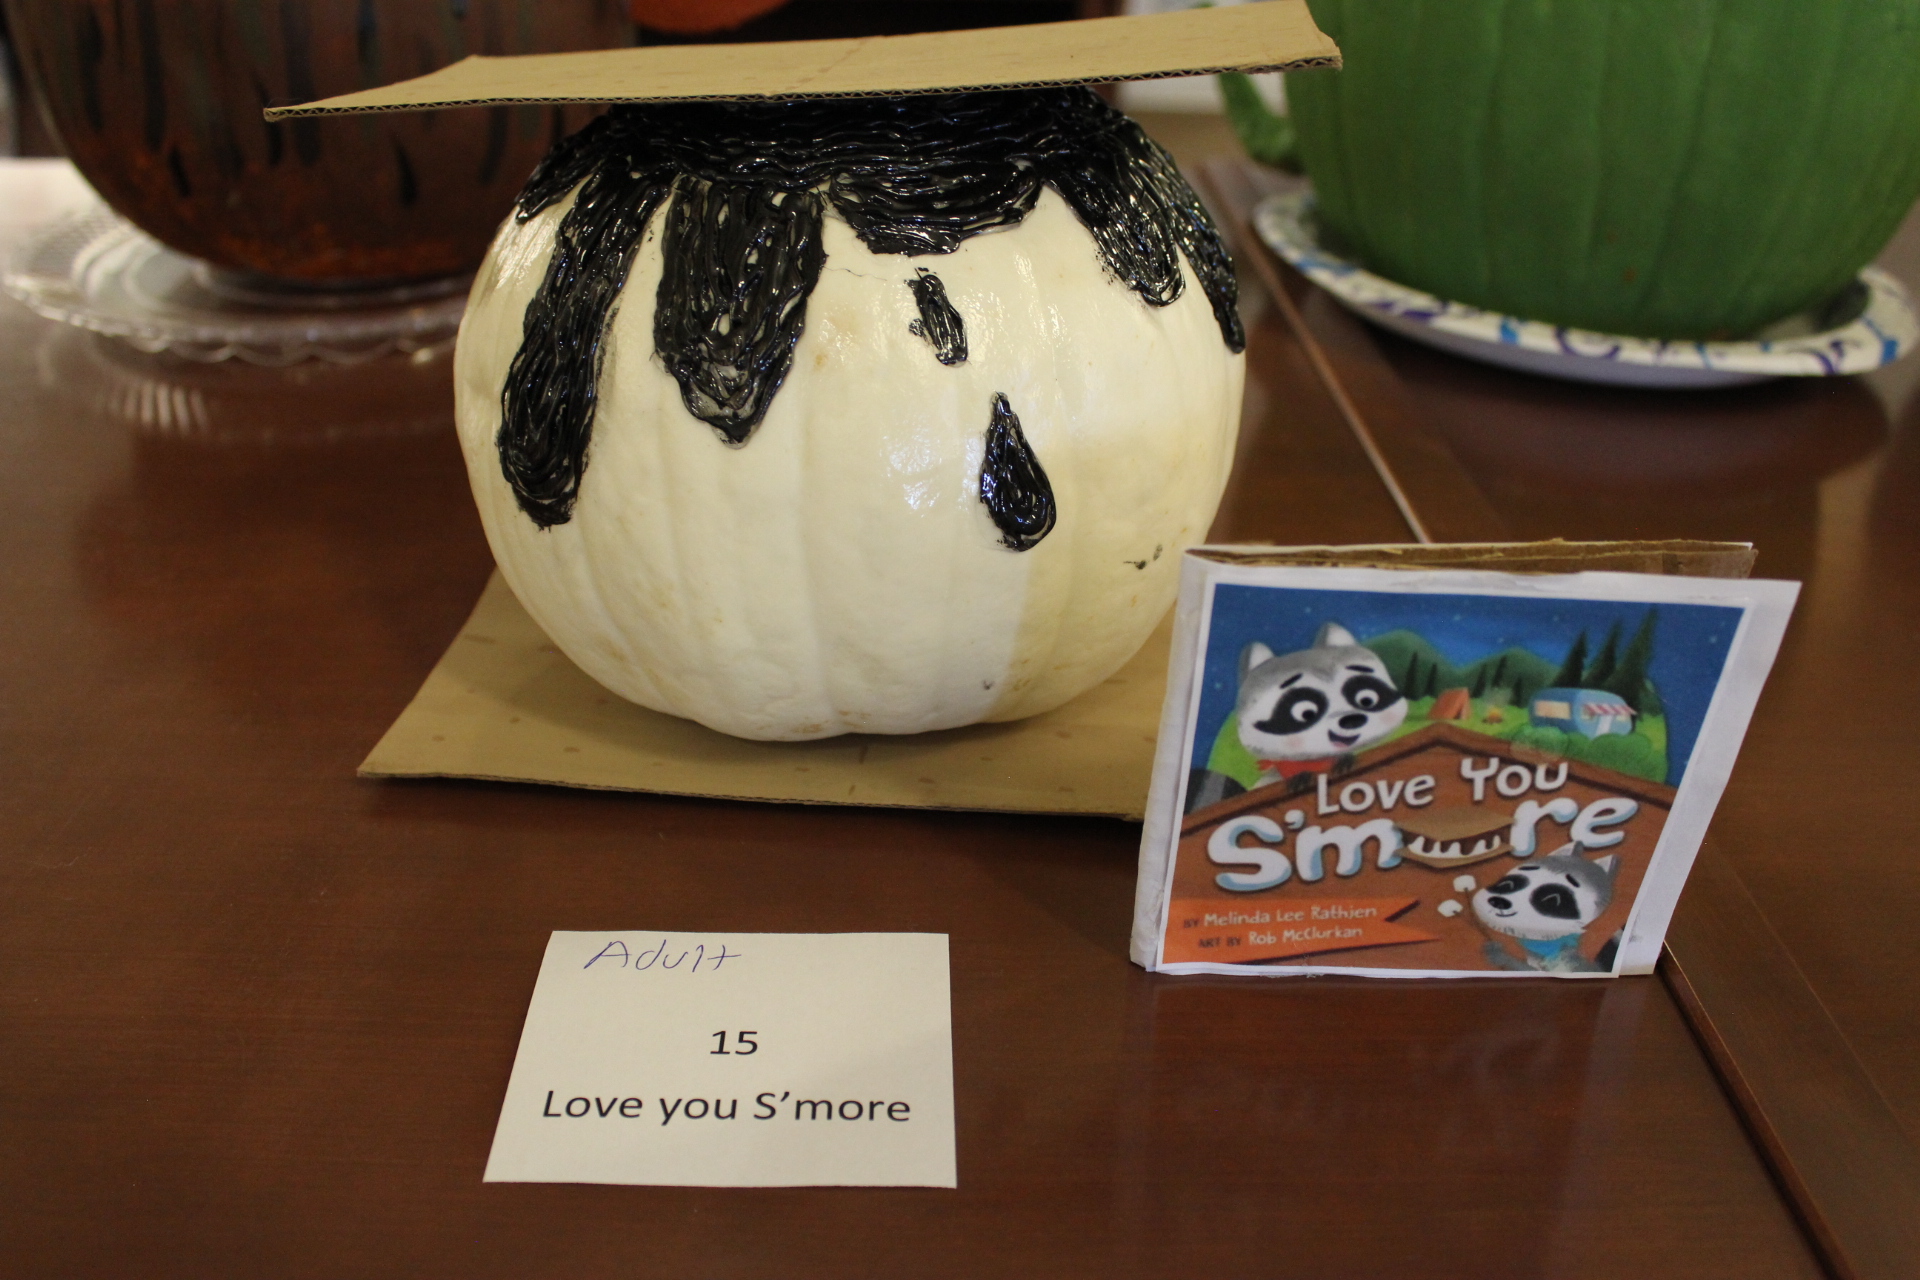 Pumpkin decorated as "Love You S'more"